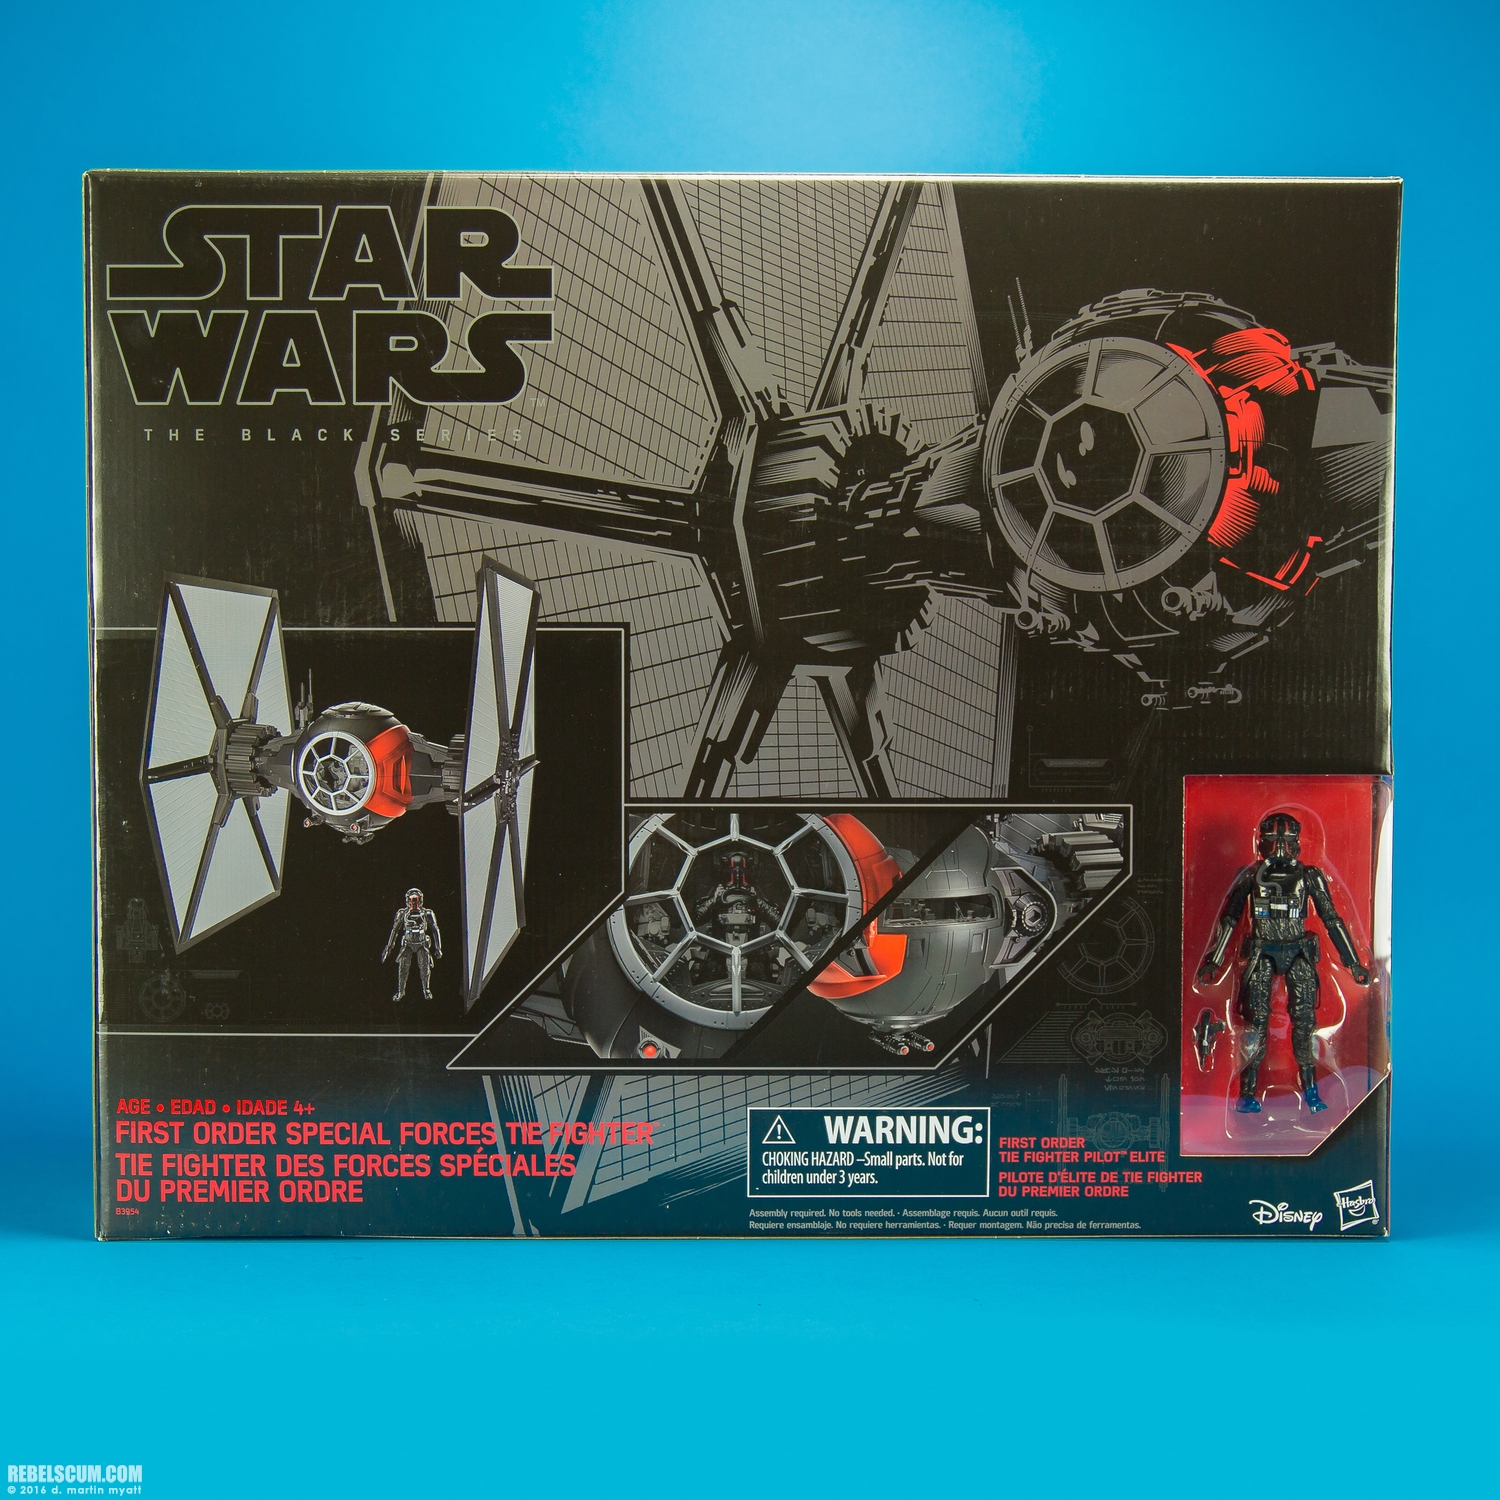 First-Order-Special-Forces-TIE-Fighter-The-Black-Series-026.jpg